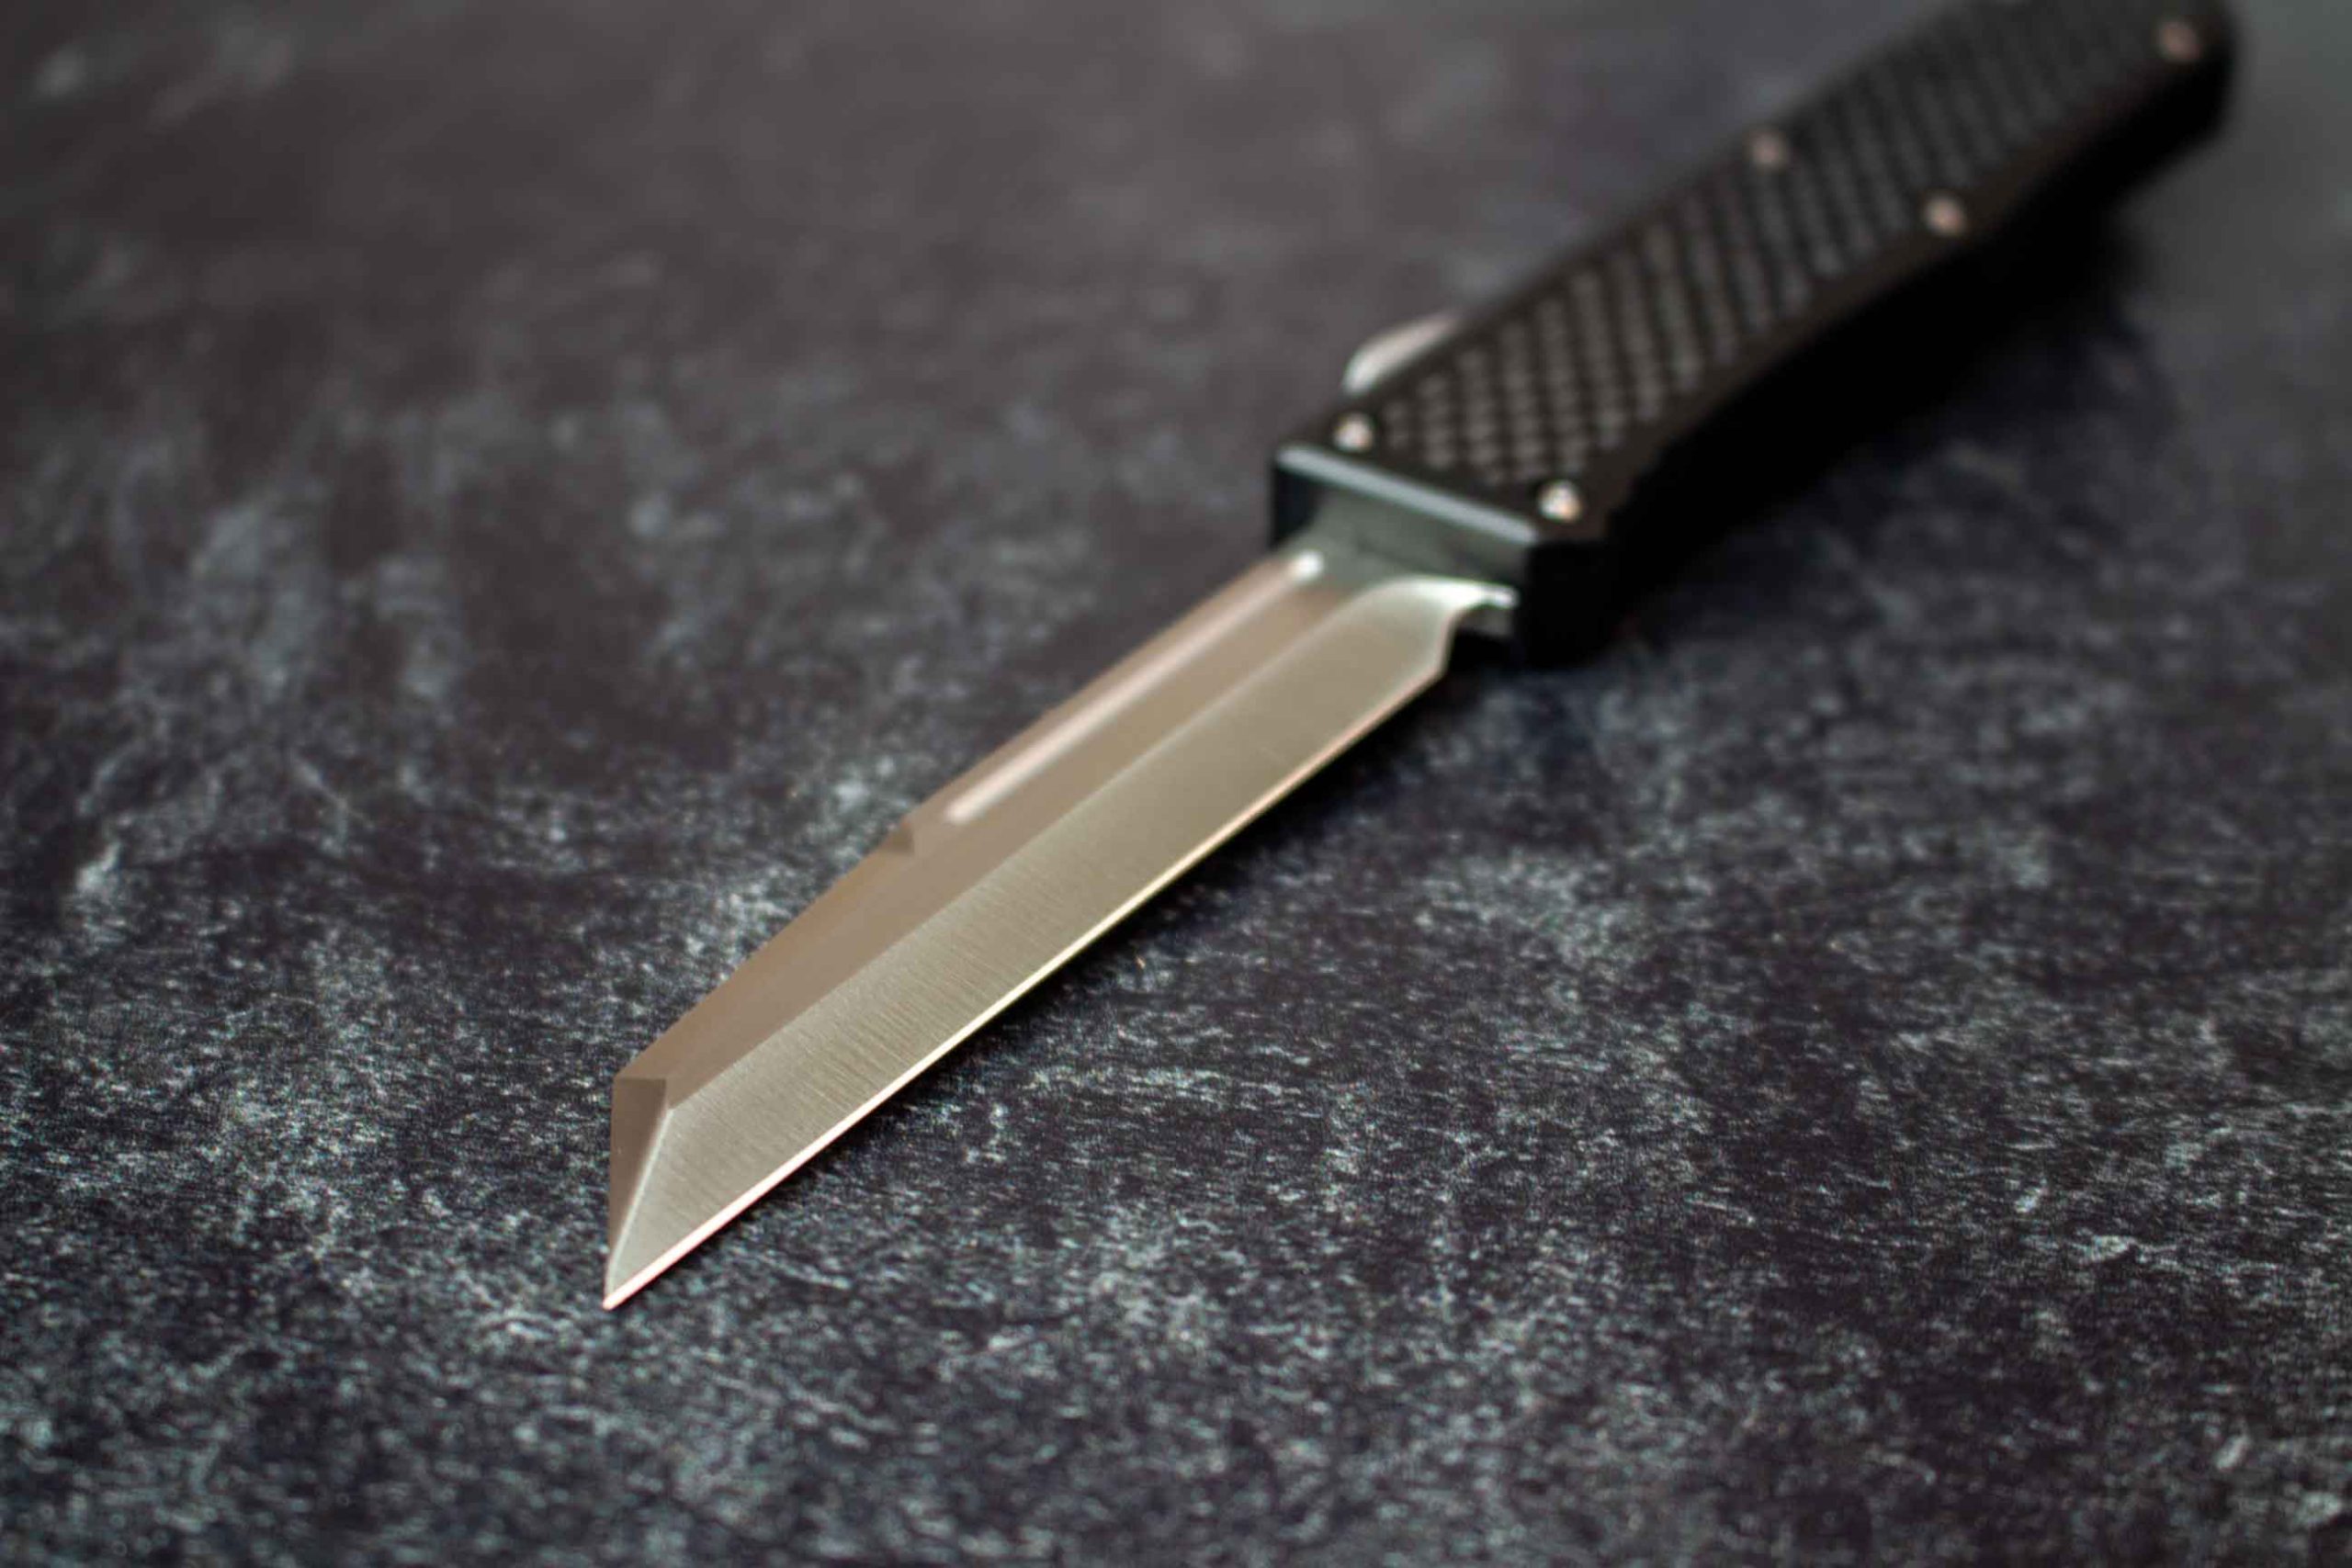 Premium OTF Knife Is an Investment Over a Cheap Knife